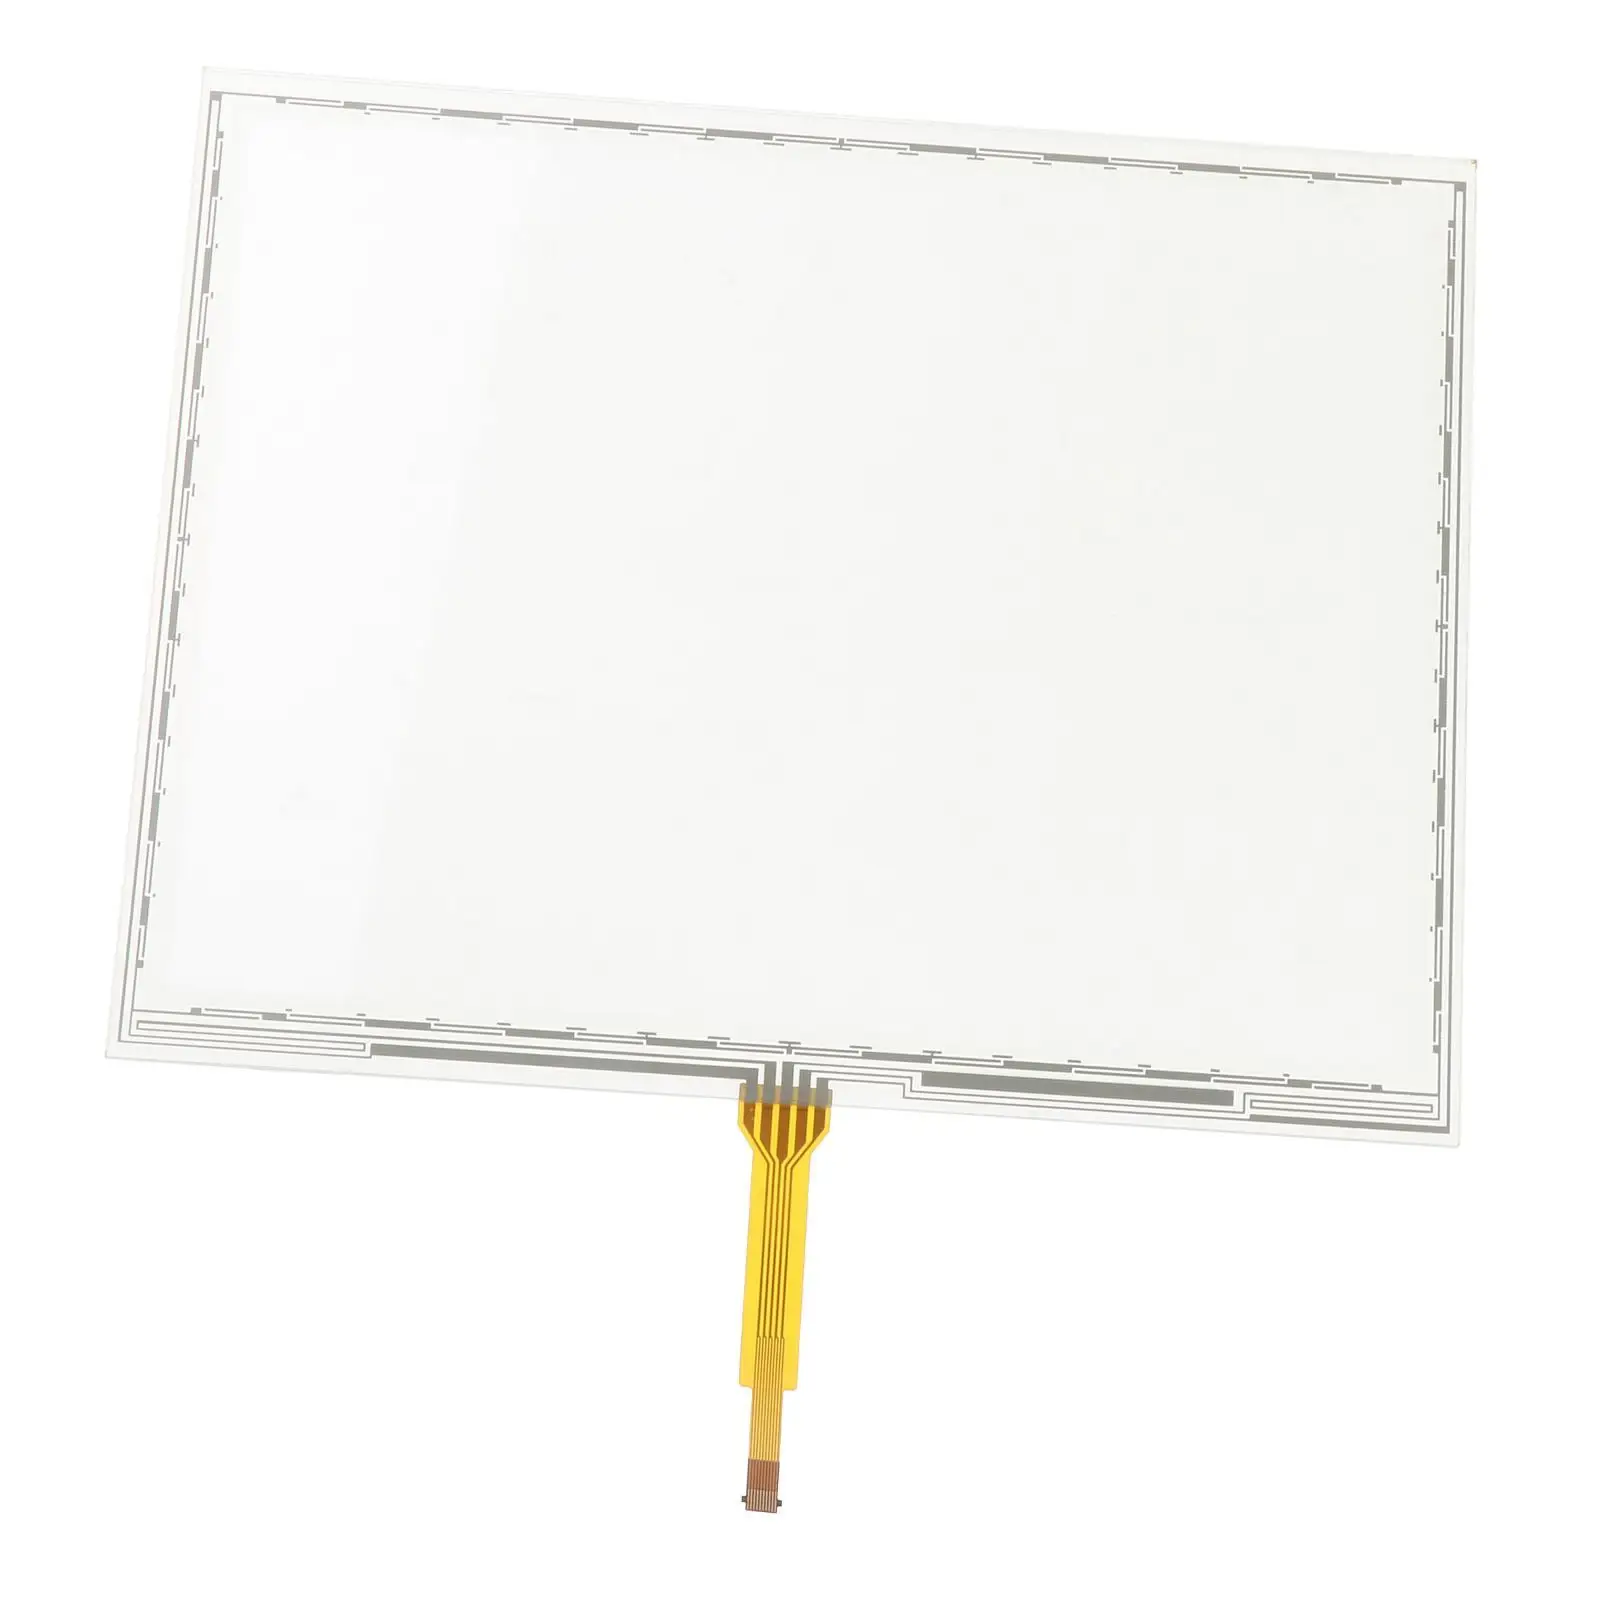 Touch Screen Panel Fpc-863Ne LCD Display Panel 9.09inchx7.17inch for 4640 Direct Installation Replacement Parts Durable